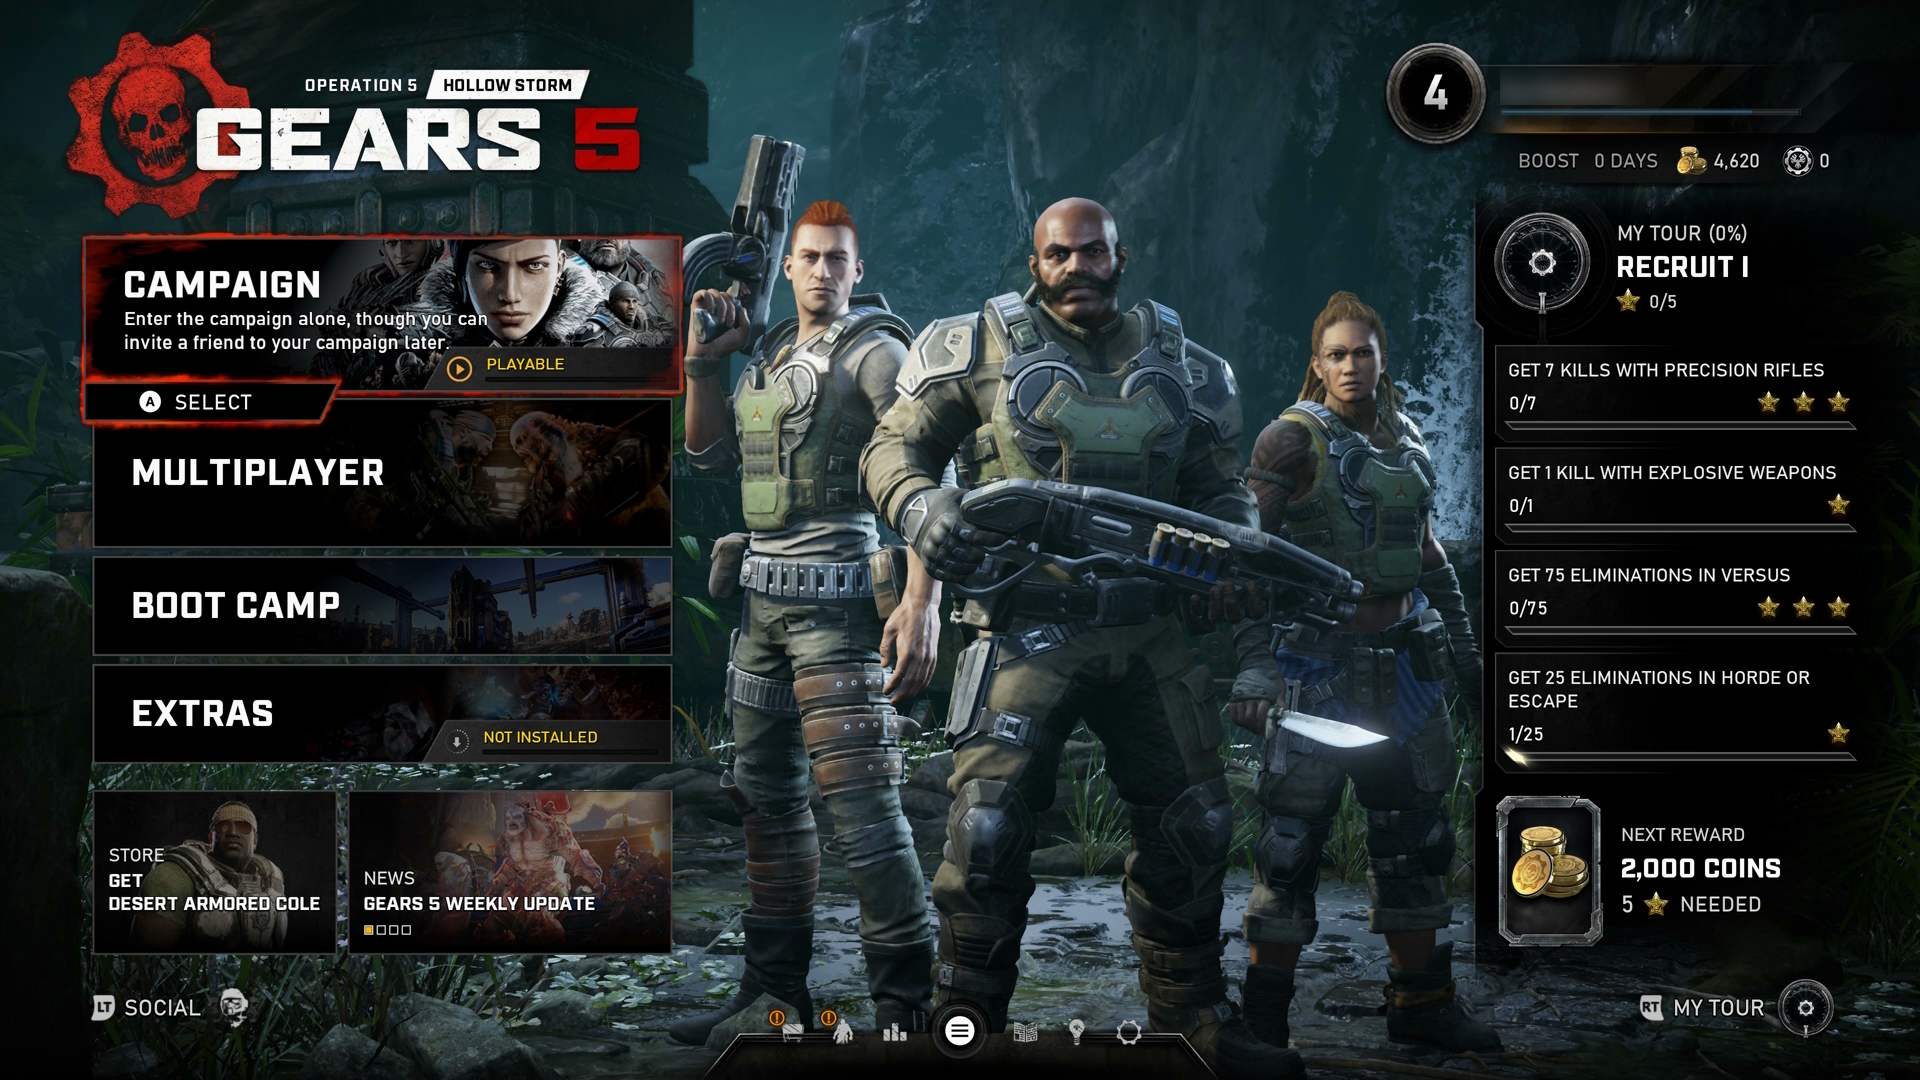 Gears 5 main menu. The player has the Campaign option highlighted.